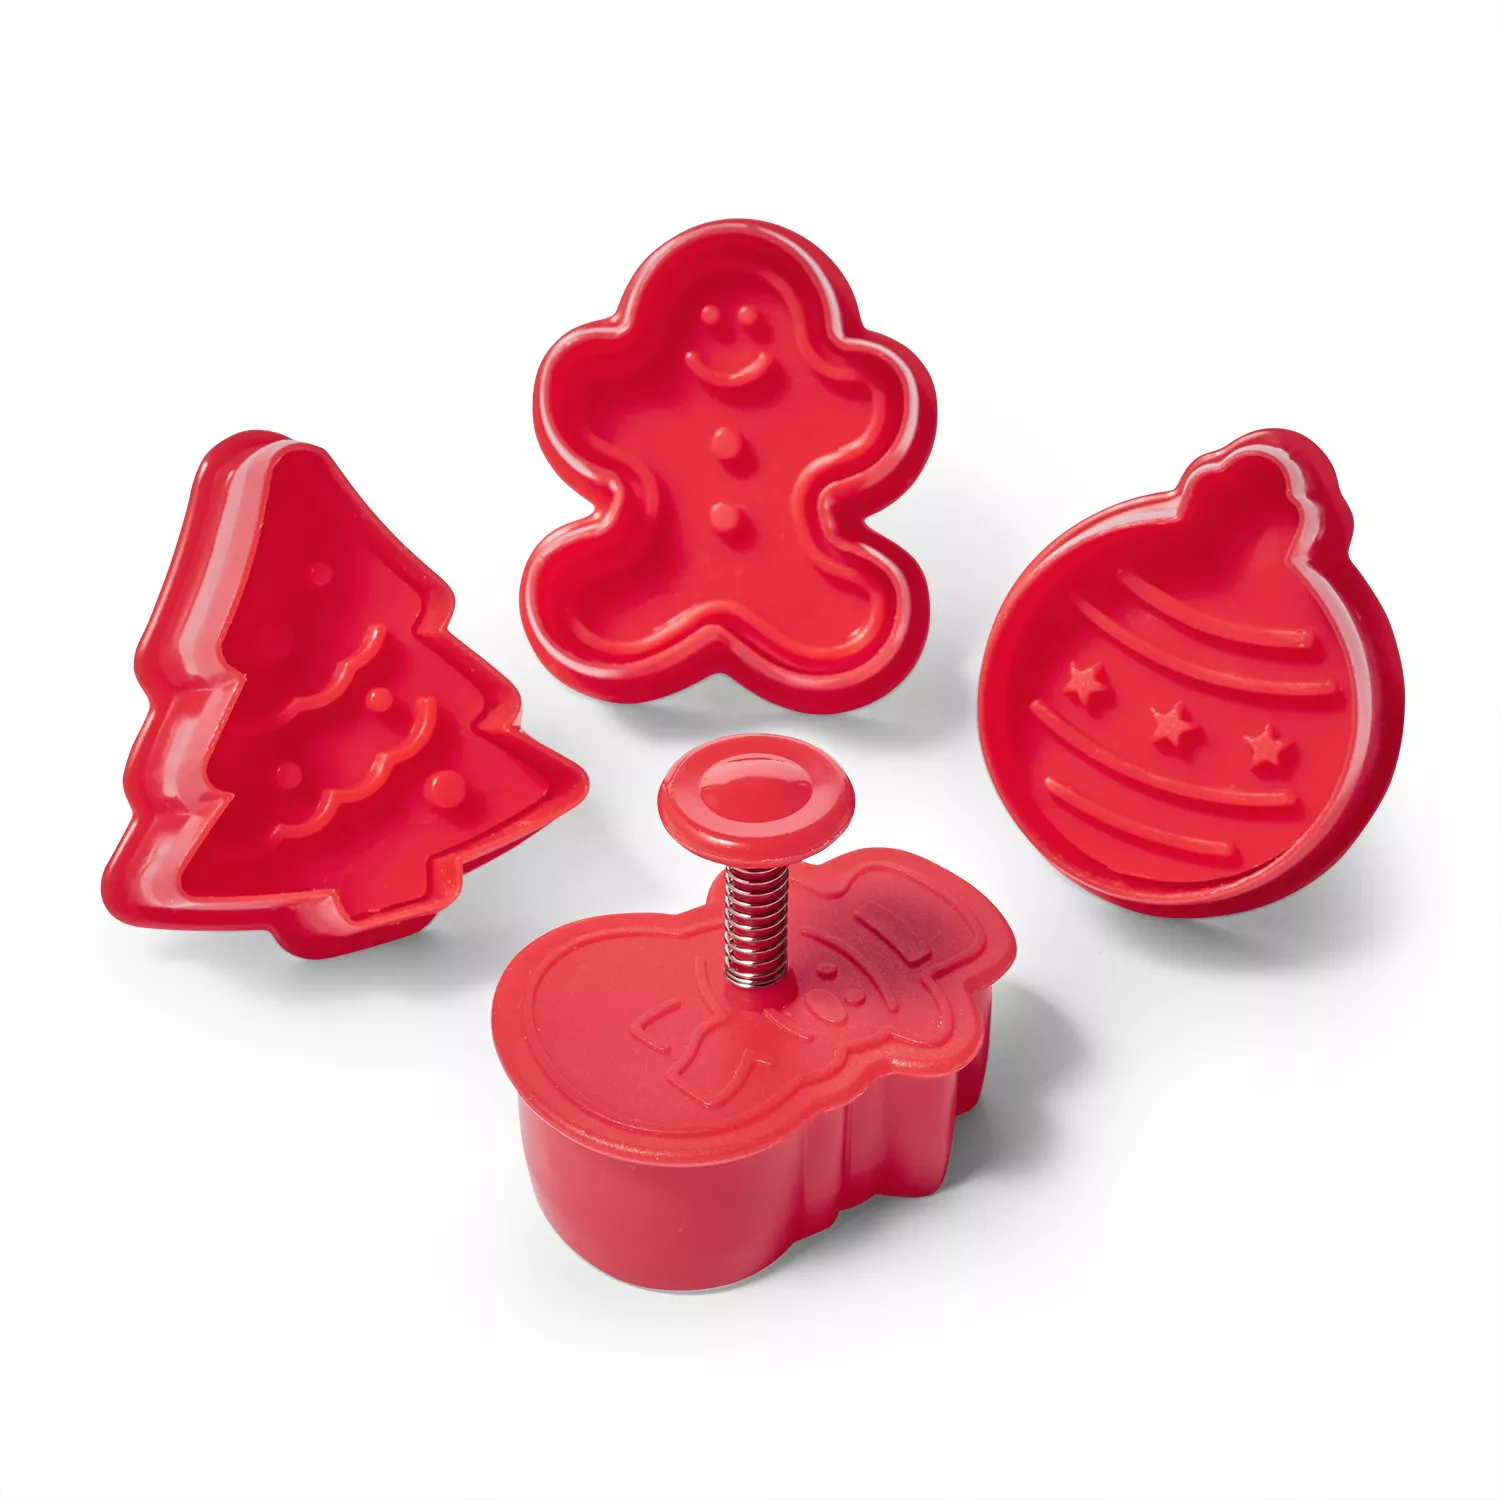 Sur La Table Holiday Pie Crust Cutters, Set of 4